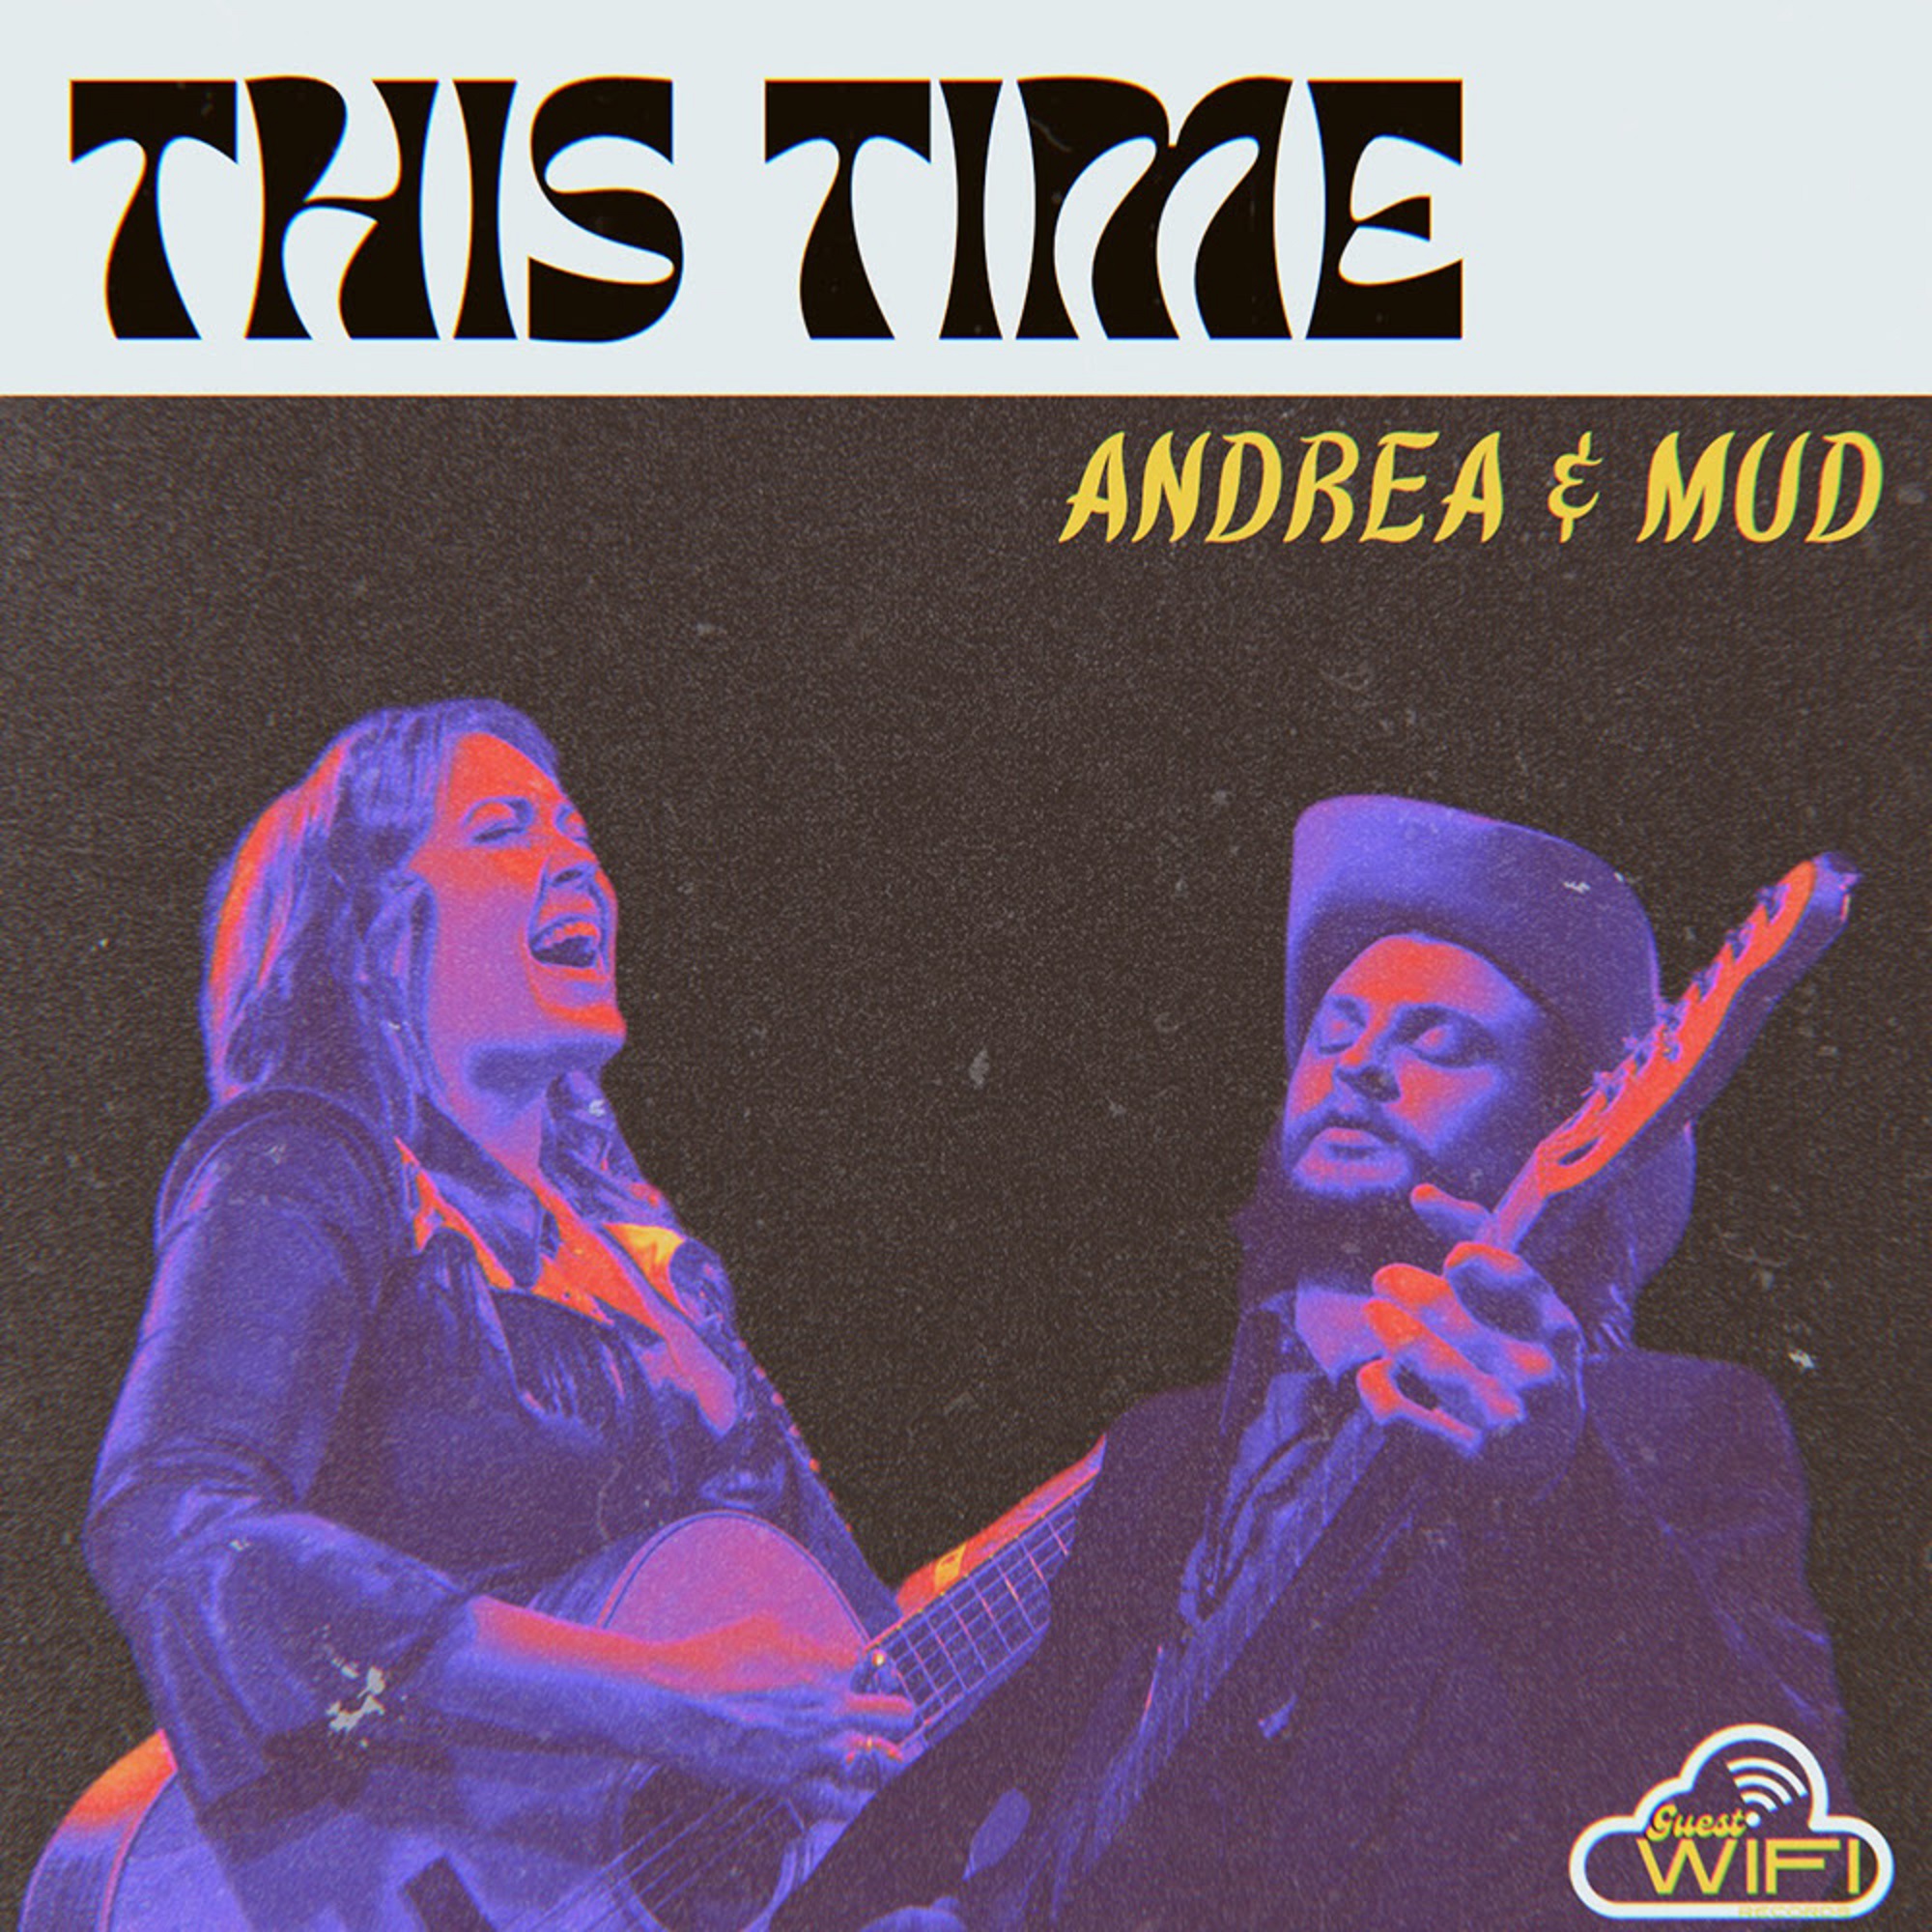 Andrea & Mud release new single "This Time"